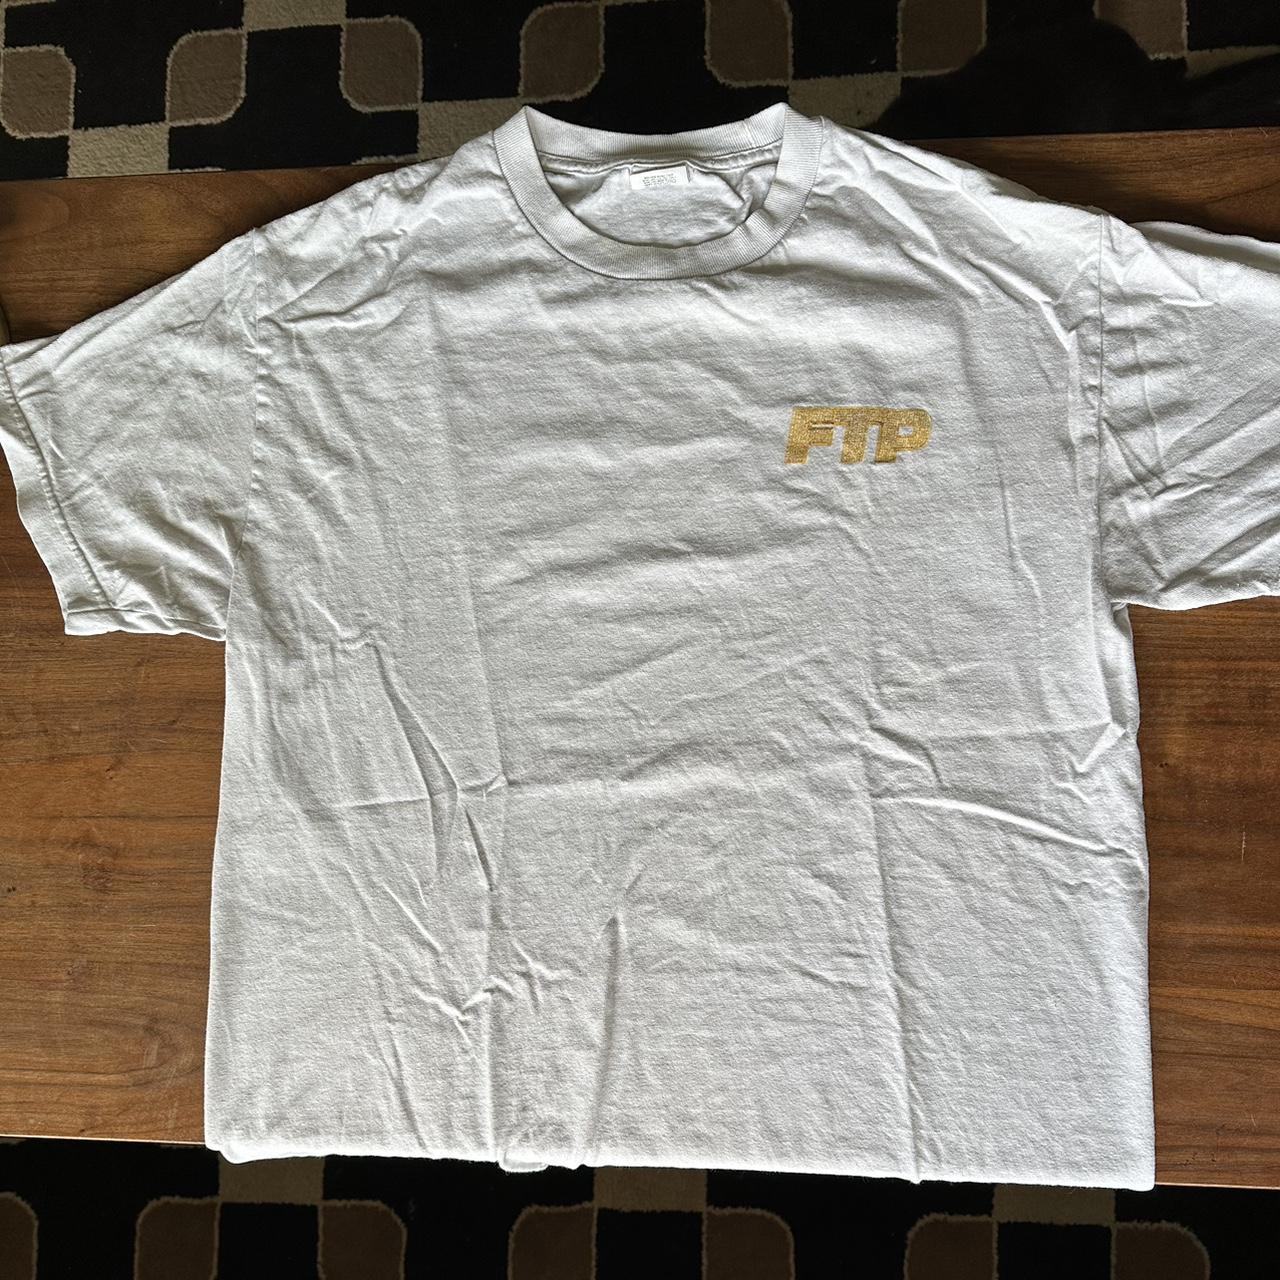 FTP Men's White and Gold T-shirt | Depop